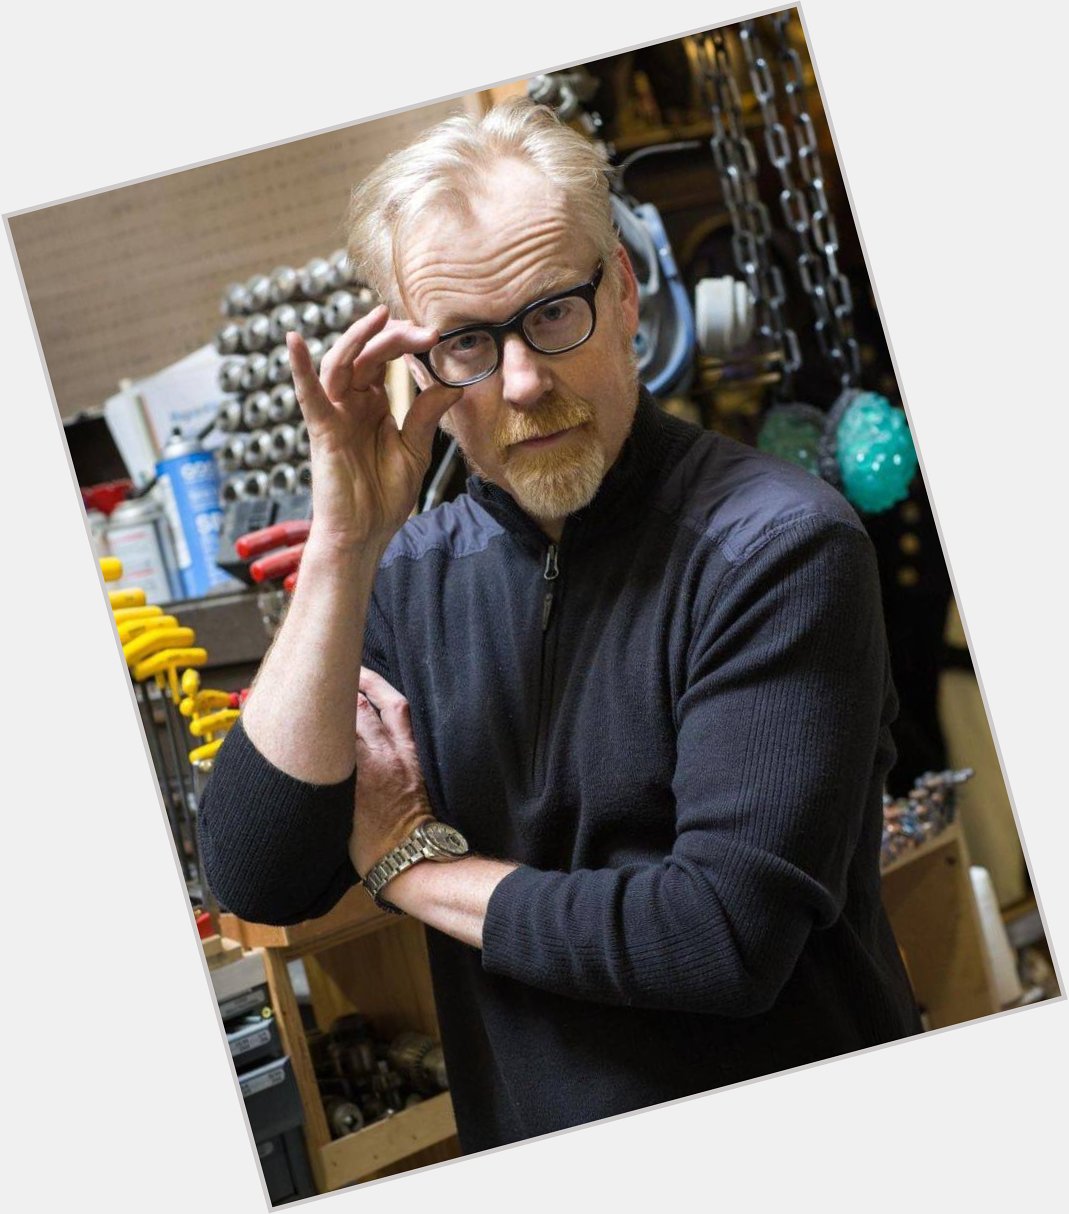 Happy Birthday to Mythbuster Adam Savage who turns 52 today! 